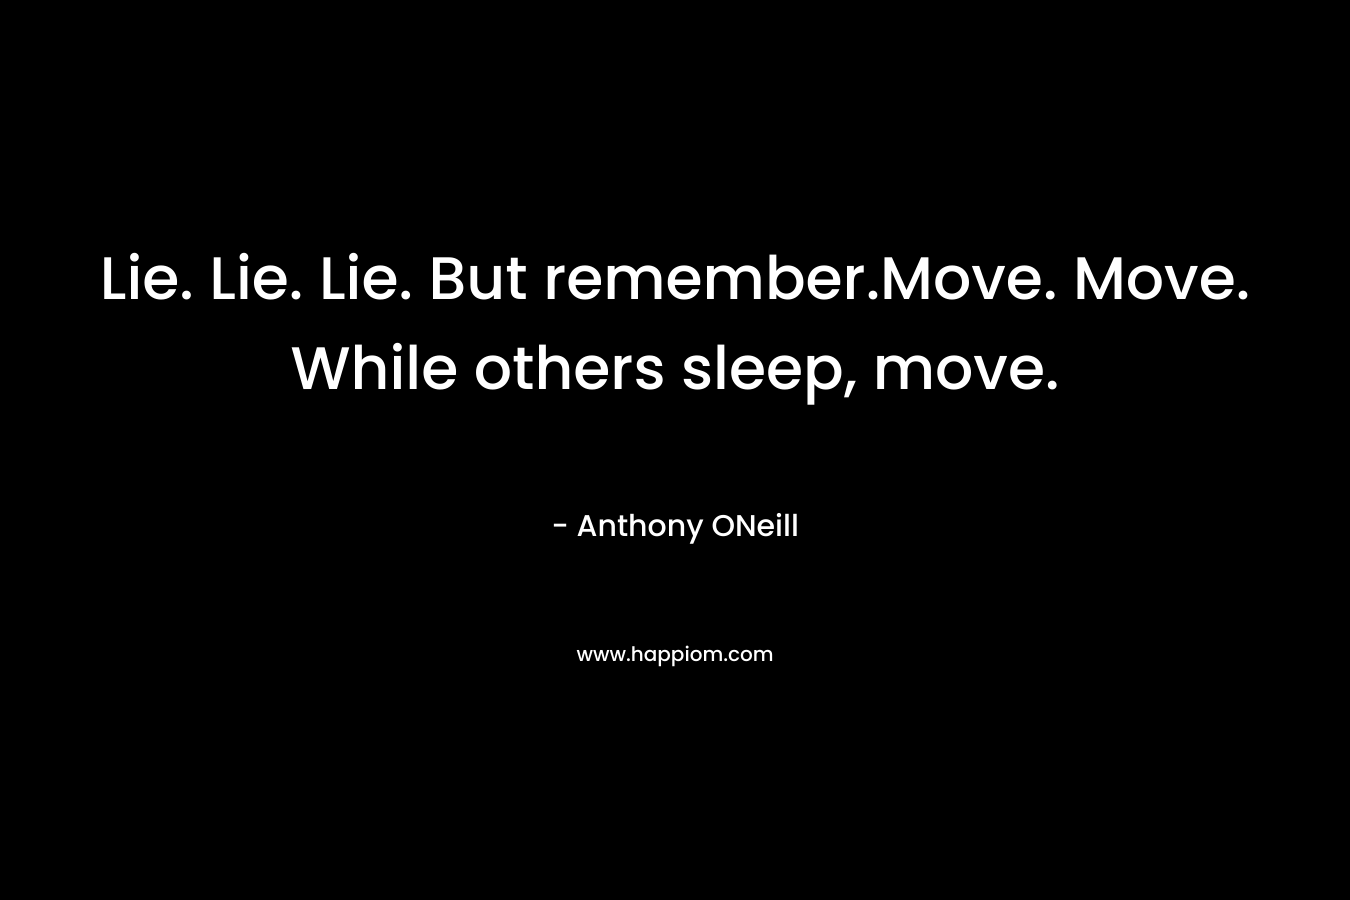 Lie. Lie. Lie. But remember.Move. Move. While others sleep, move. – Anthony ONeill